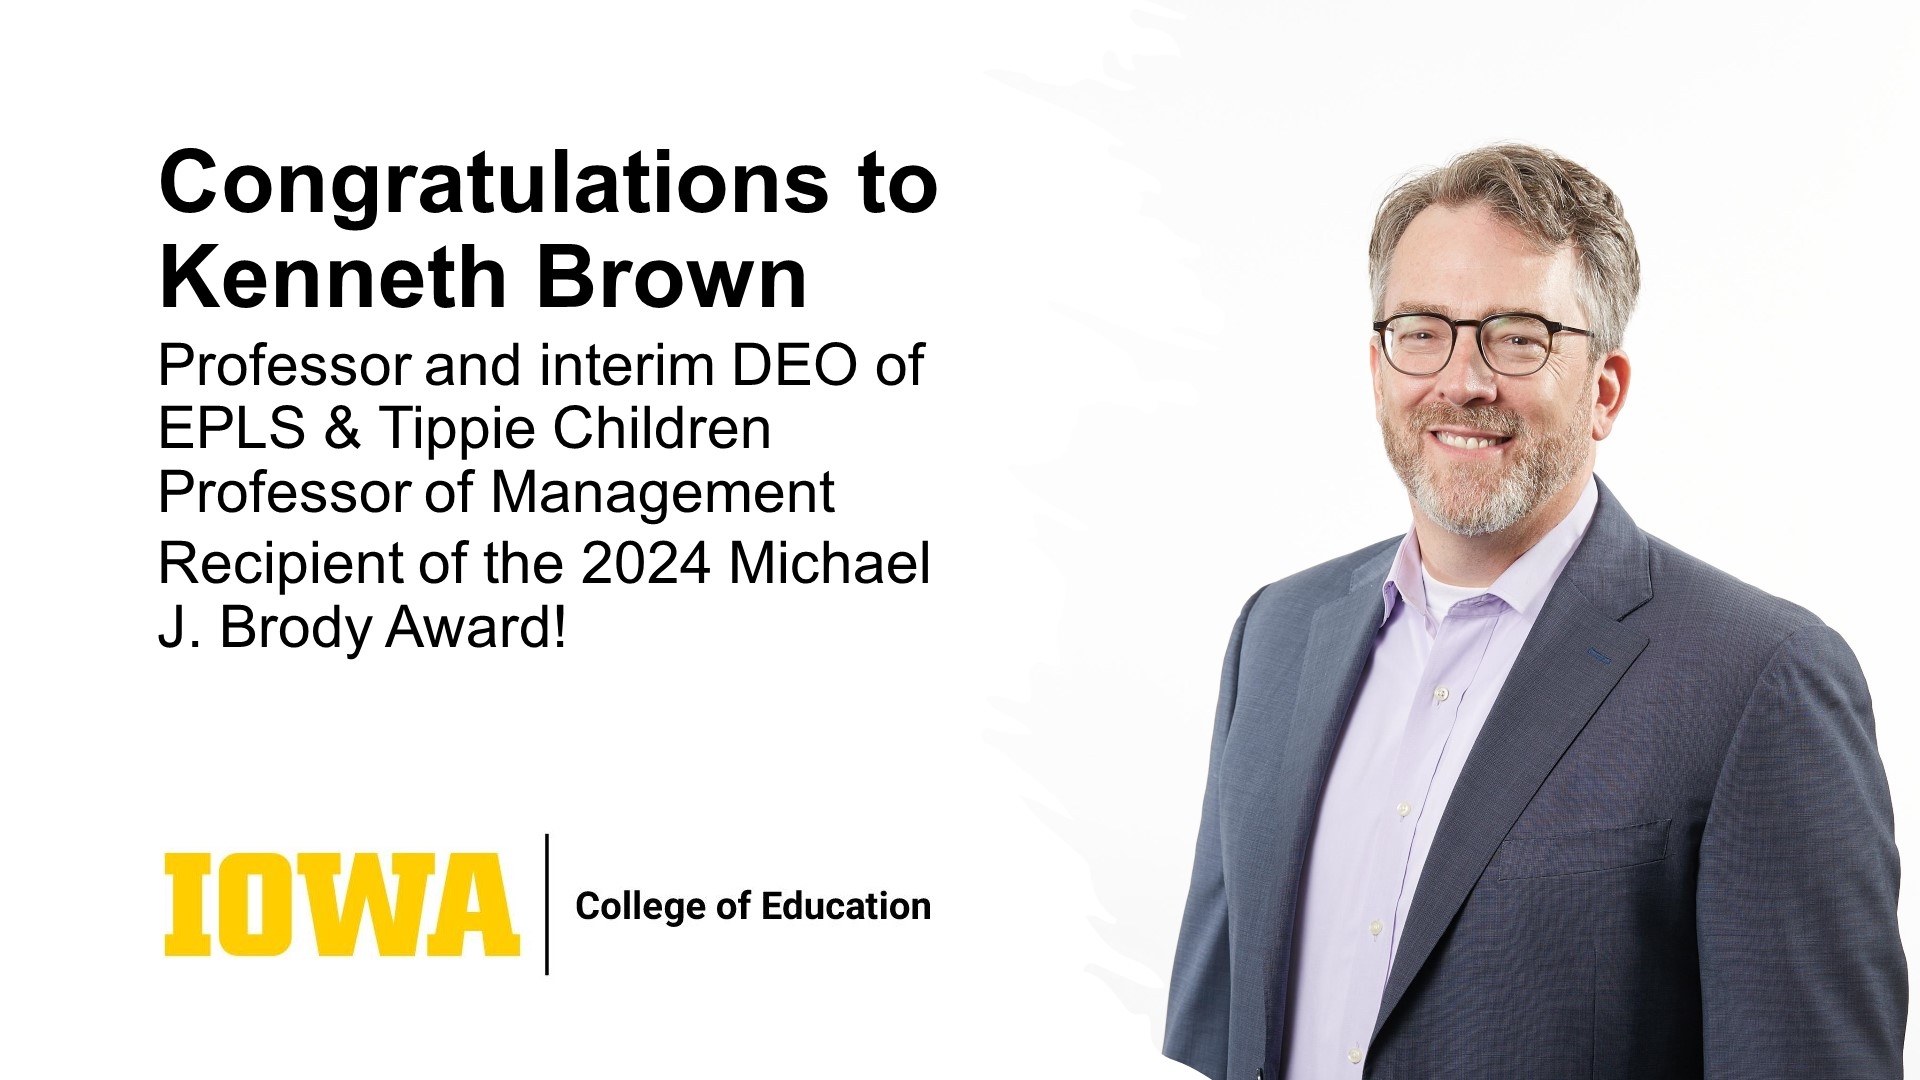 Congratulations to Kenneth Brown Professor and interim DEO of EPLS & Tippie Children Professor of Management Recipient of the 2024 Michael J. Brody Award.